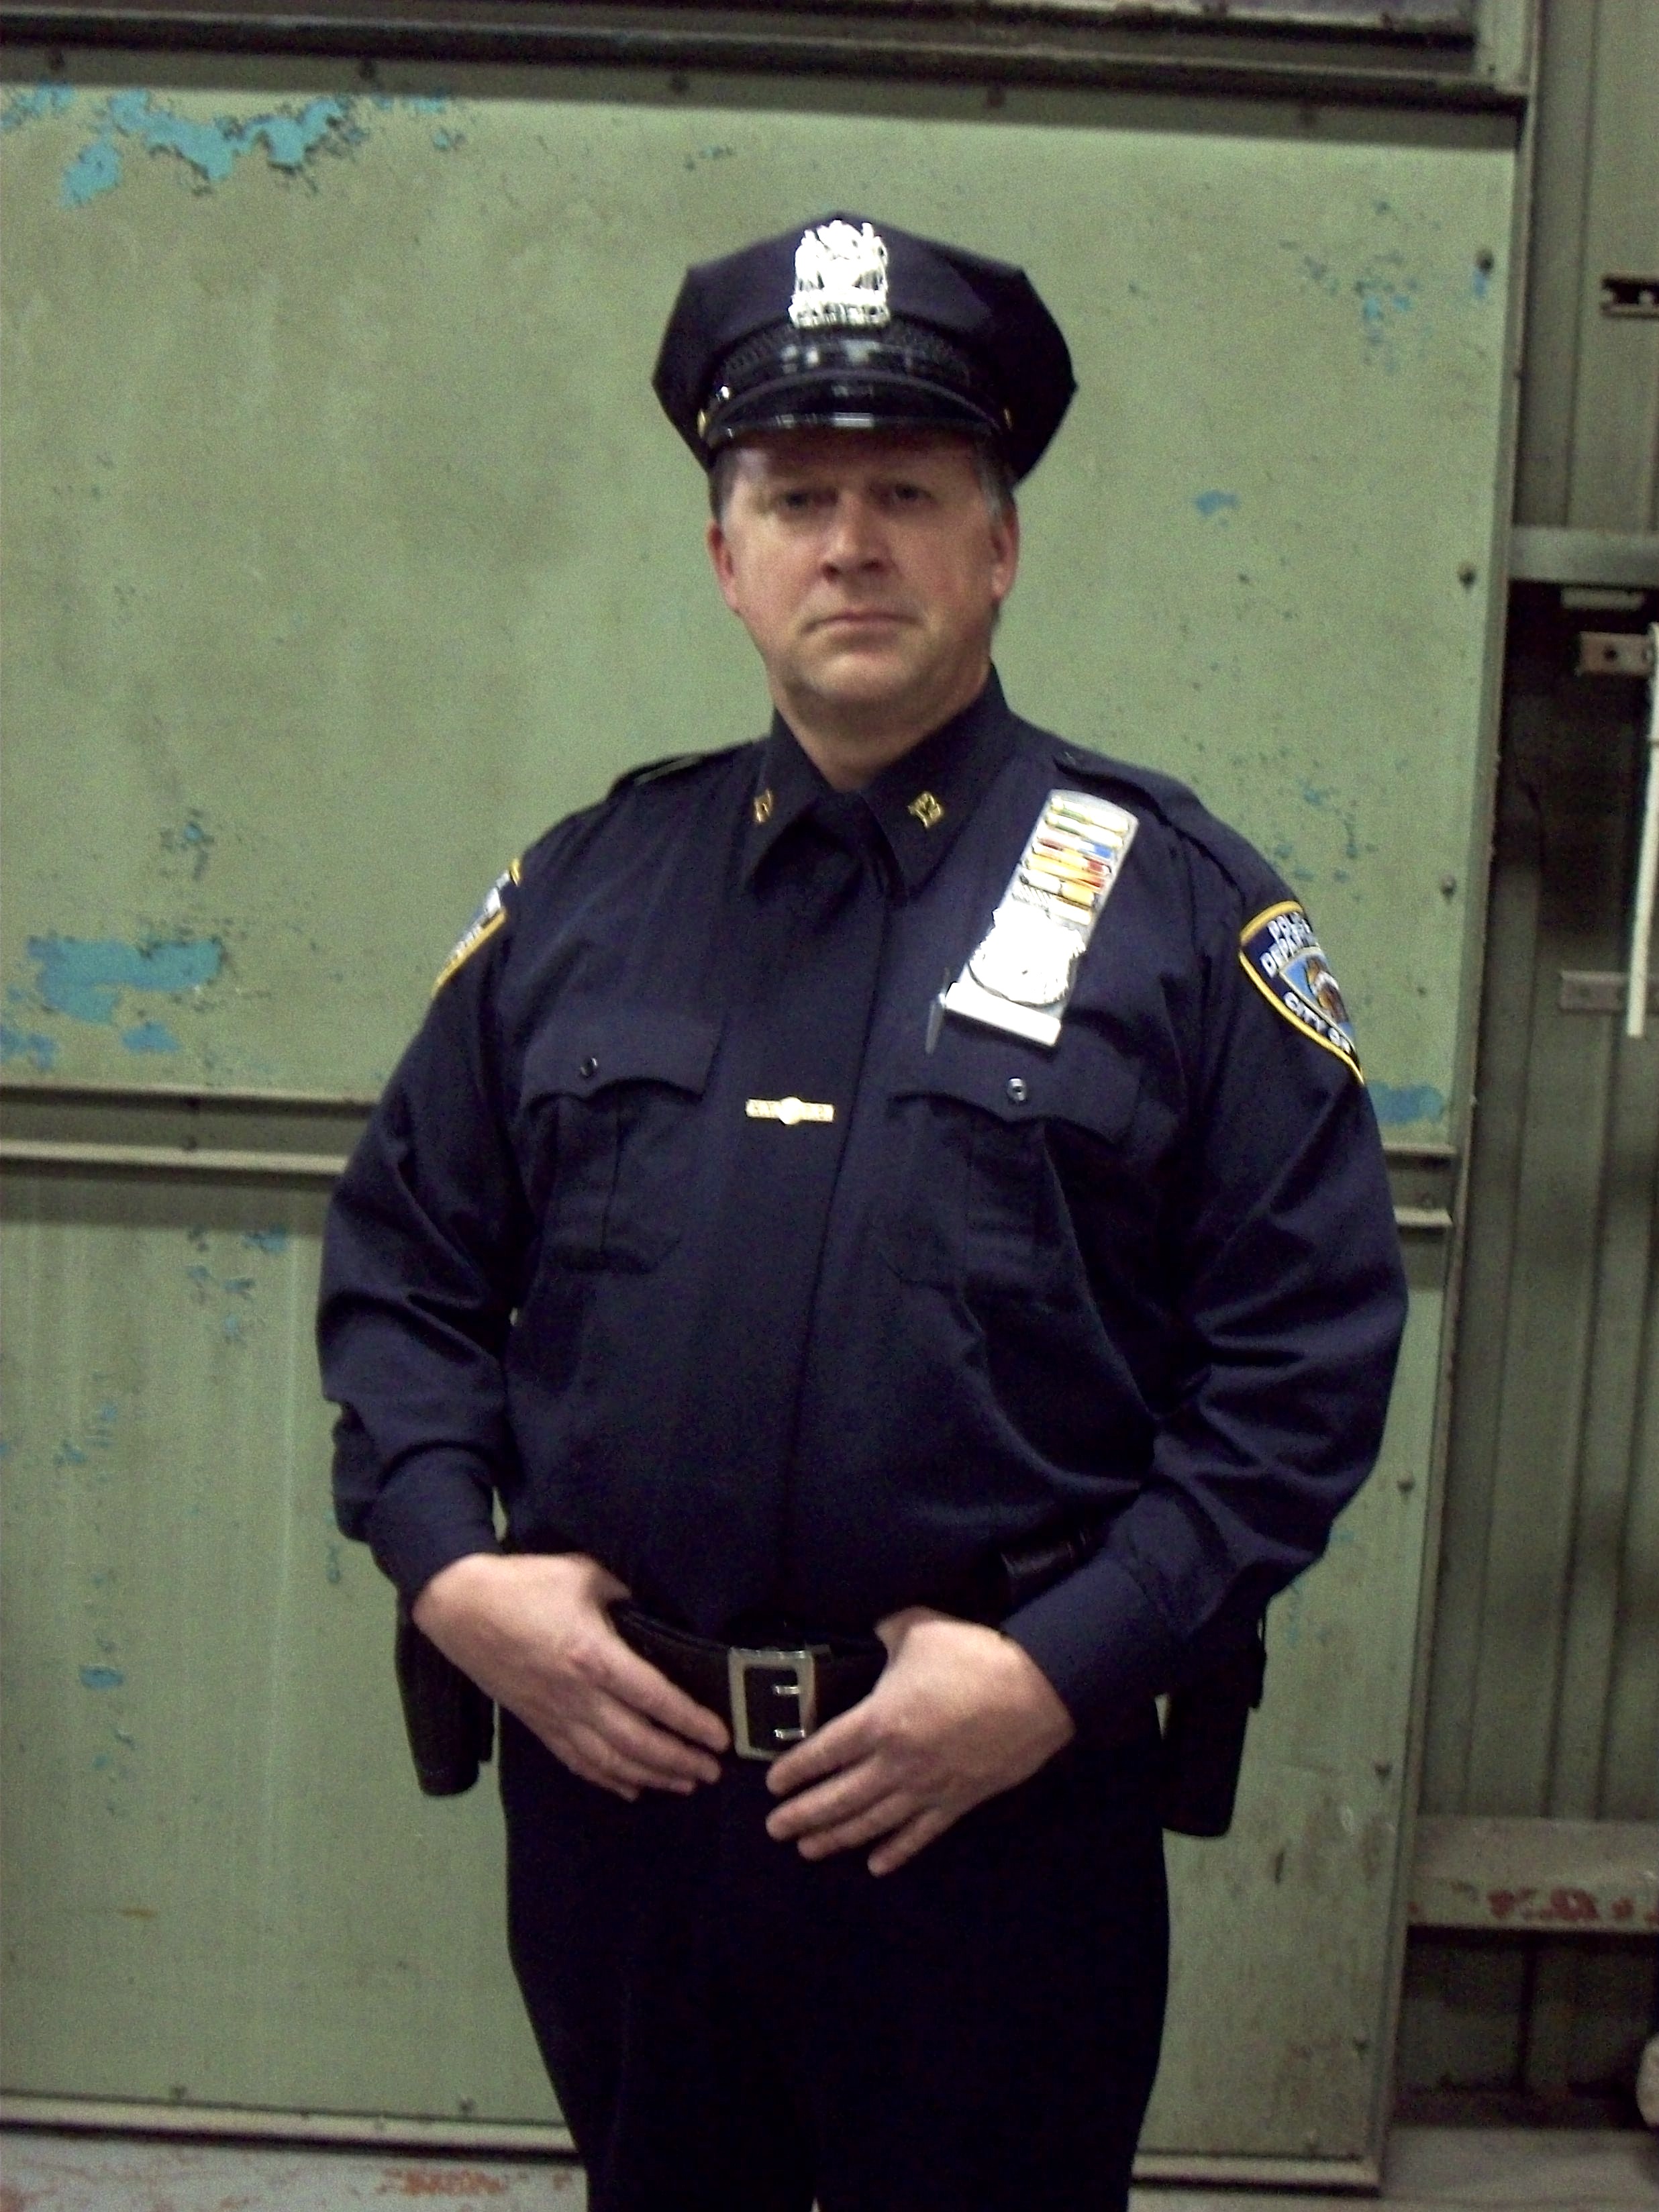 Officer Chuck Fatur, NYPD